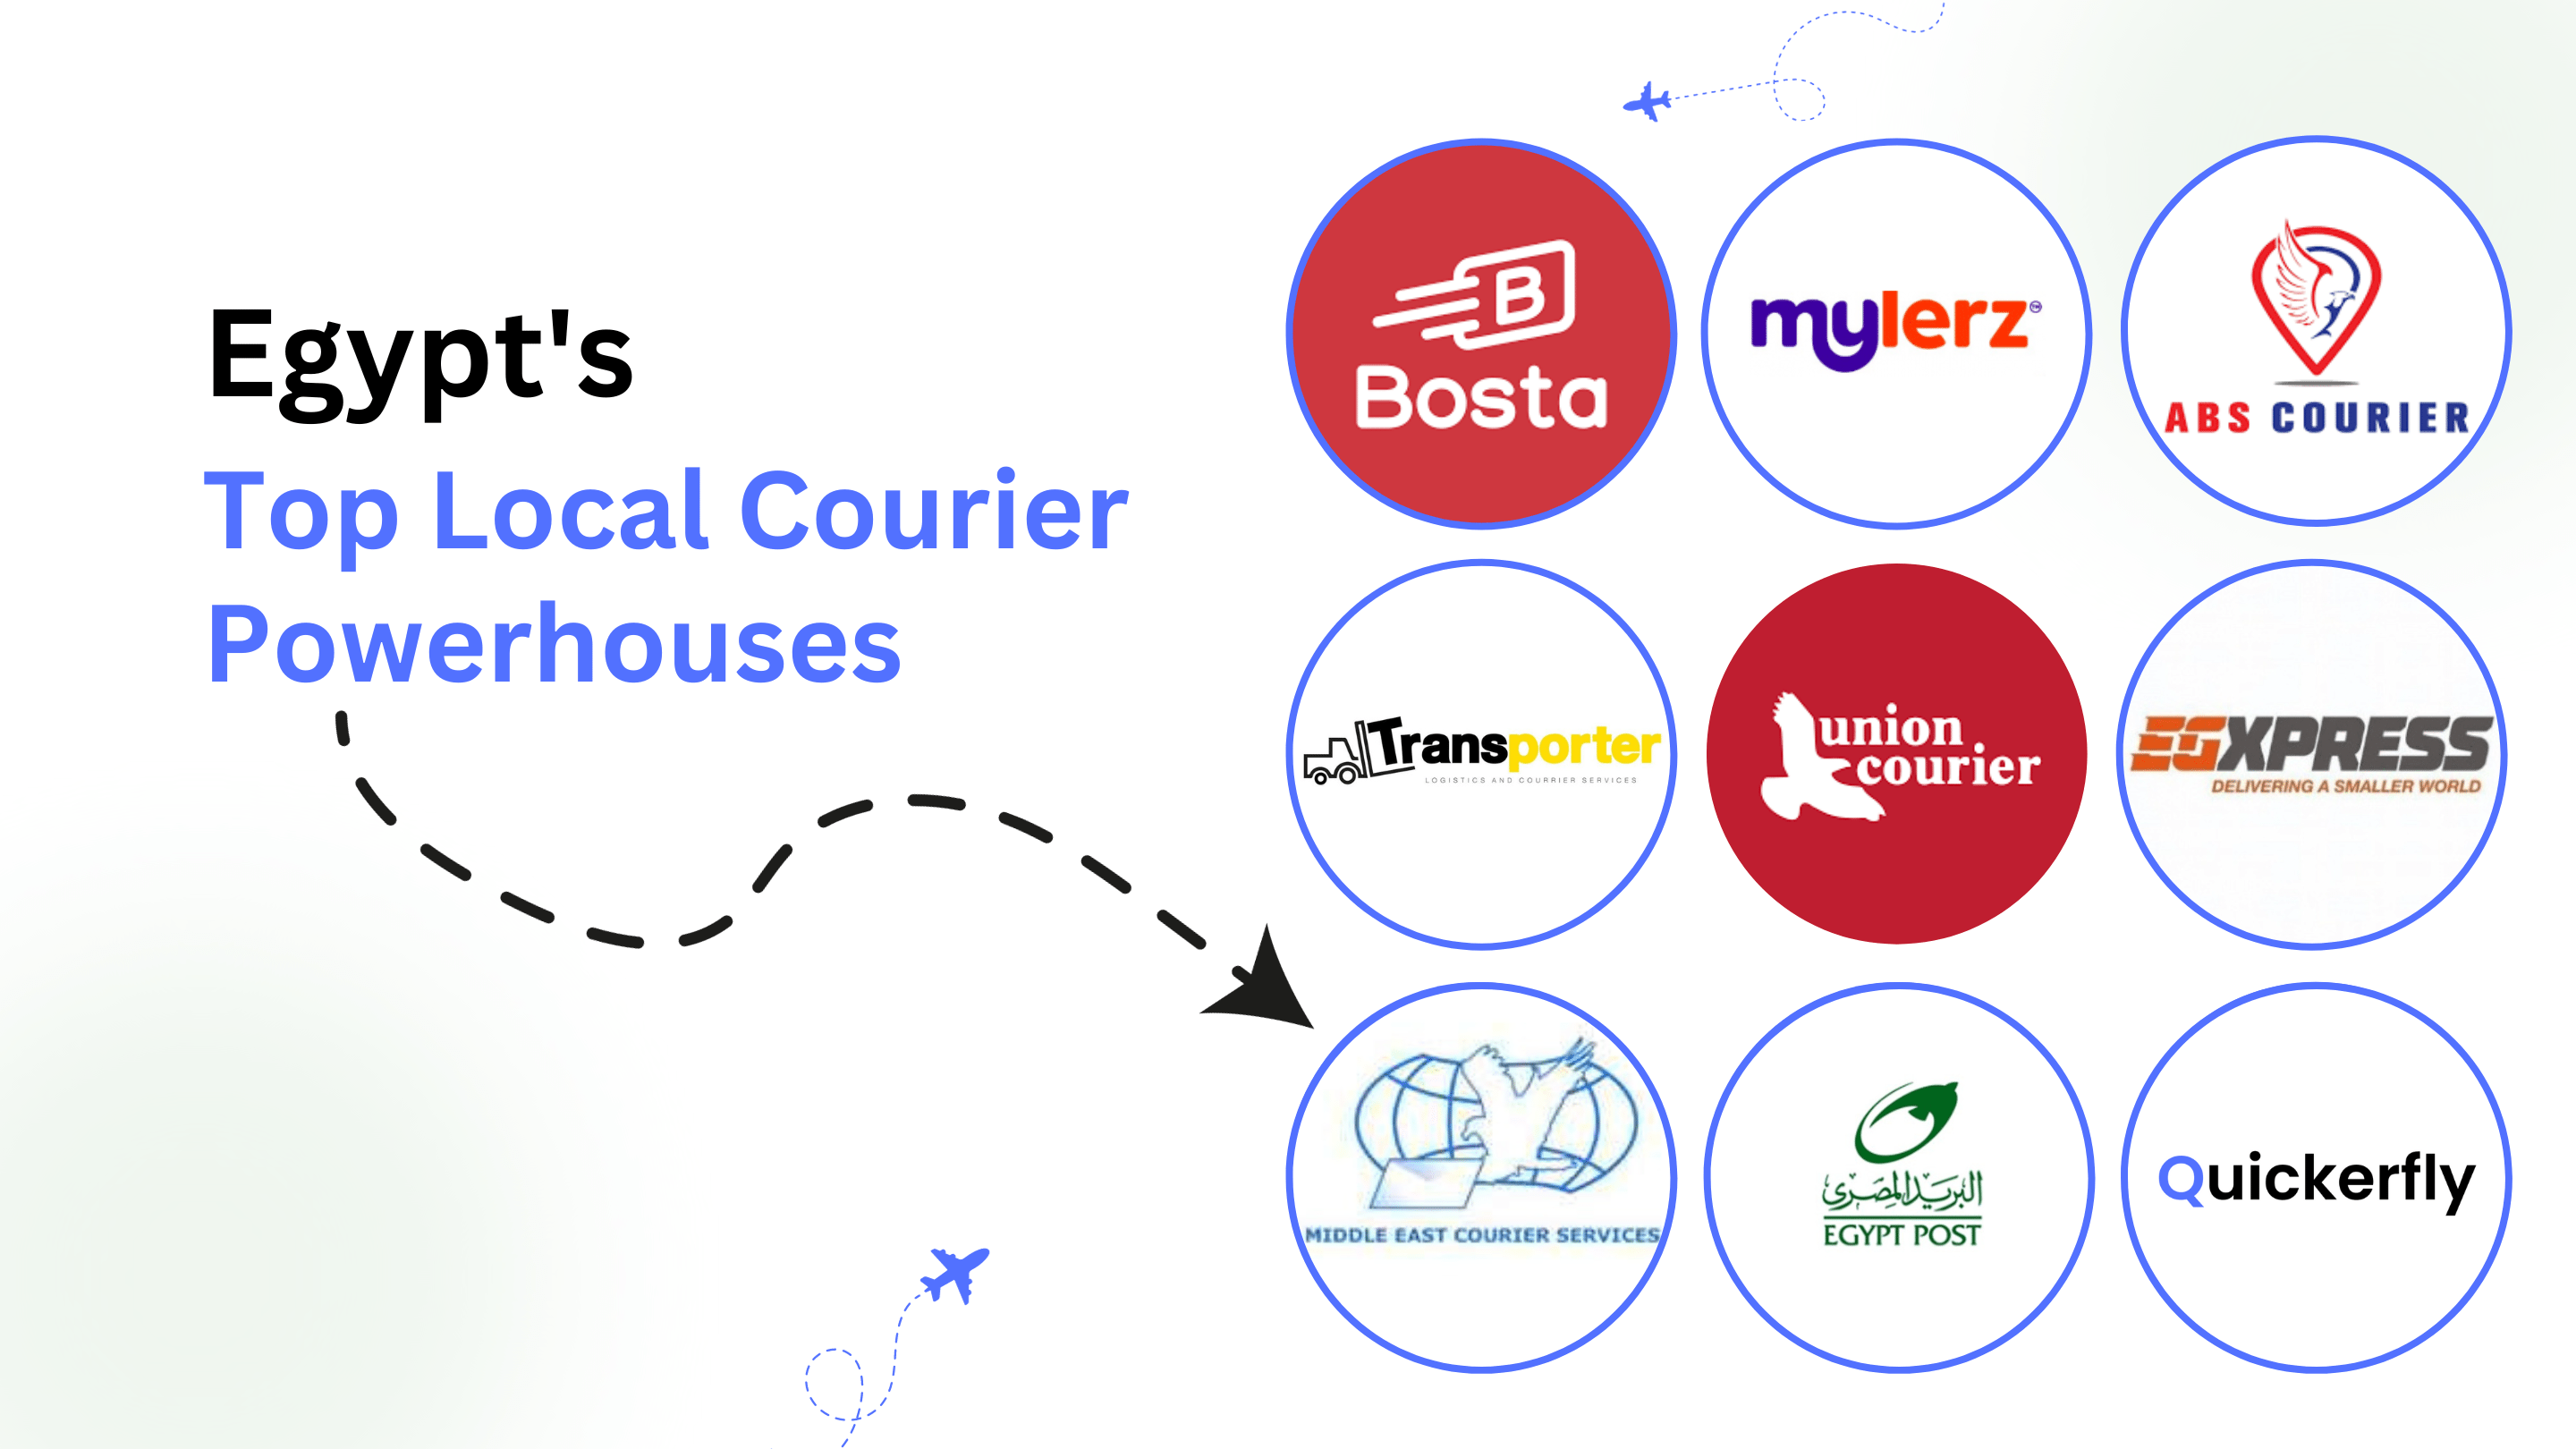 an image showing Egypt's Top Local Courier Powerhouses